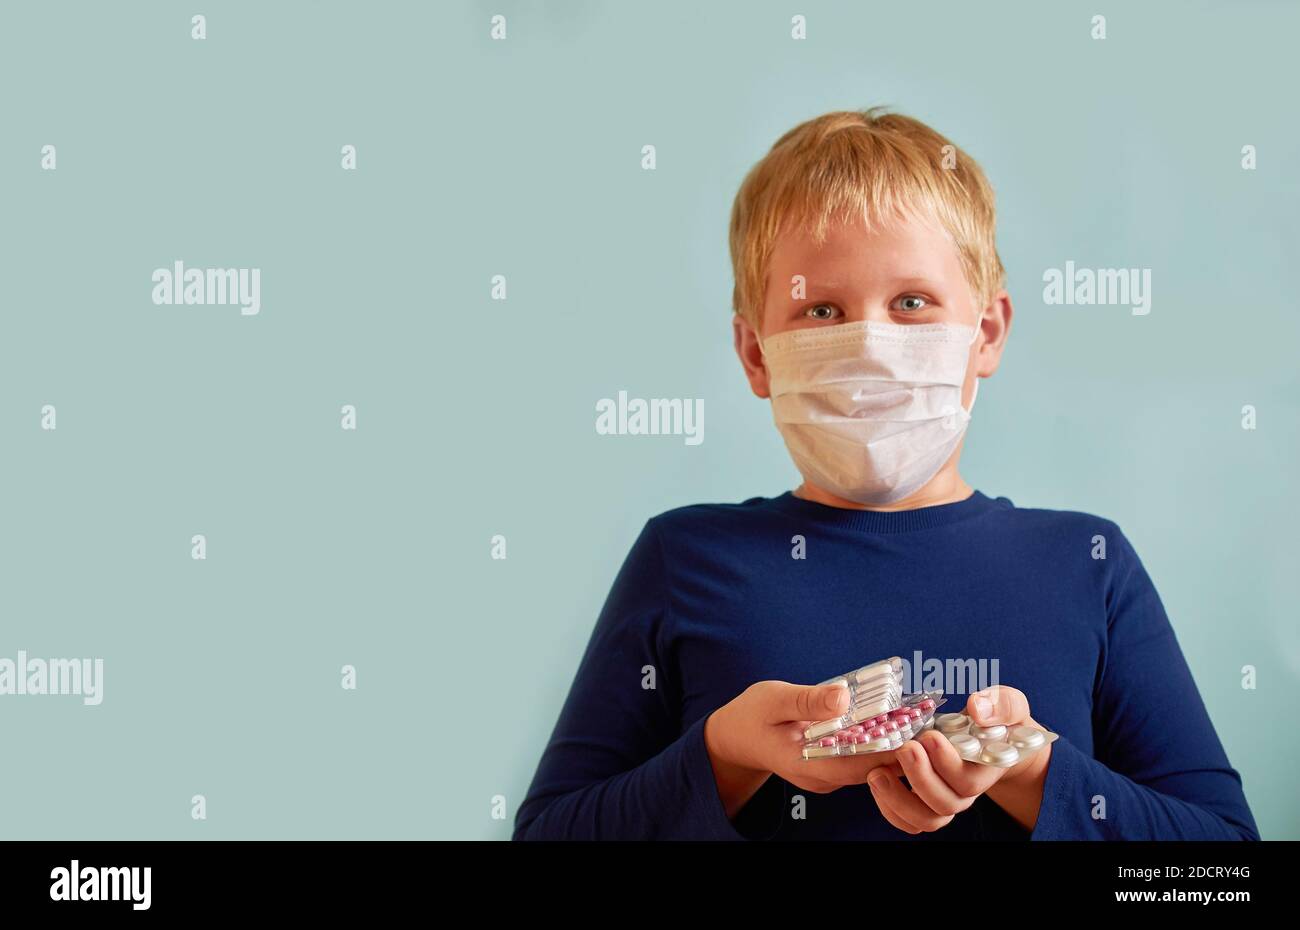 surprised European boy stands holding a pile of pills on a plain blue background Stock Photo